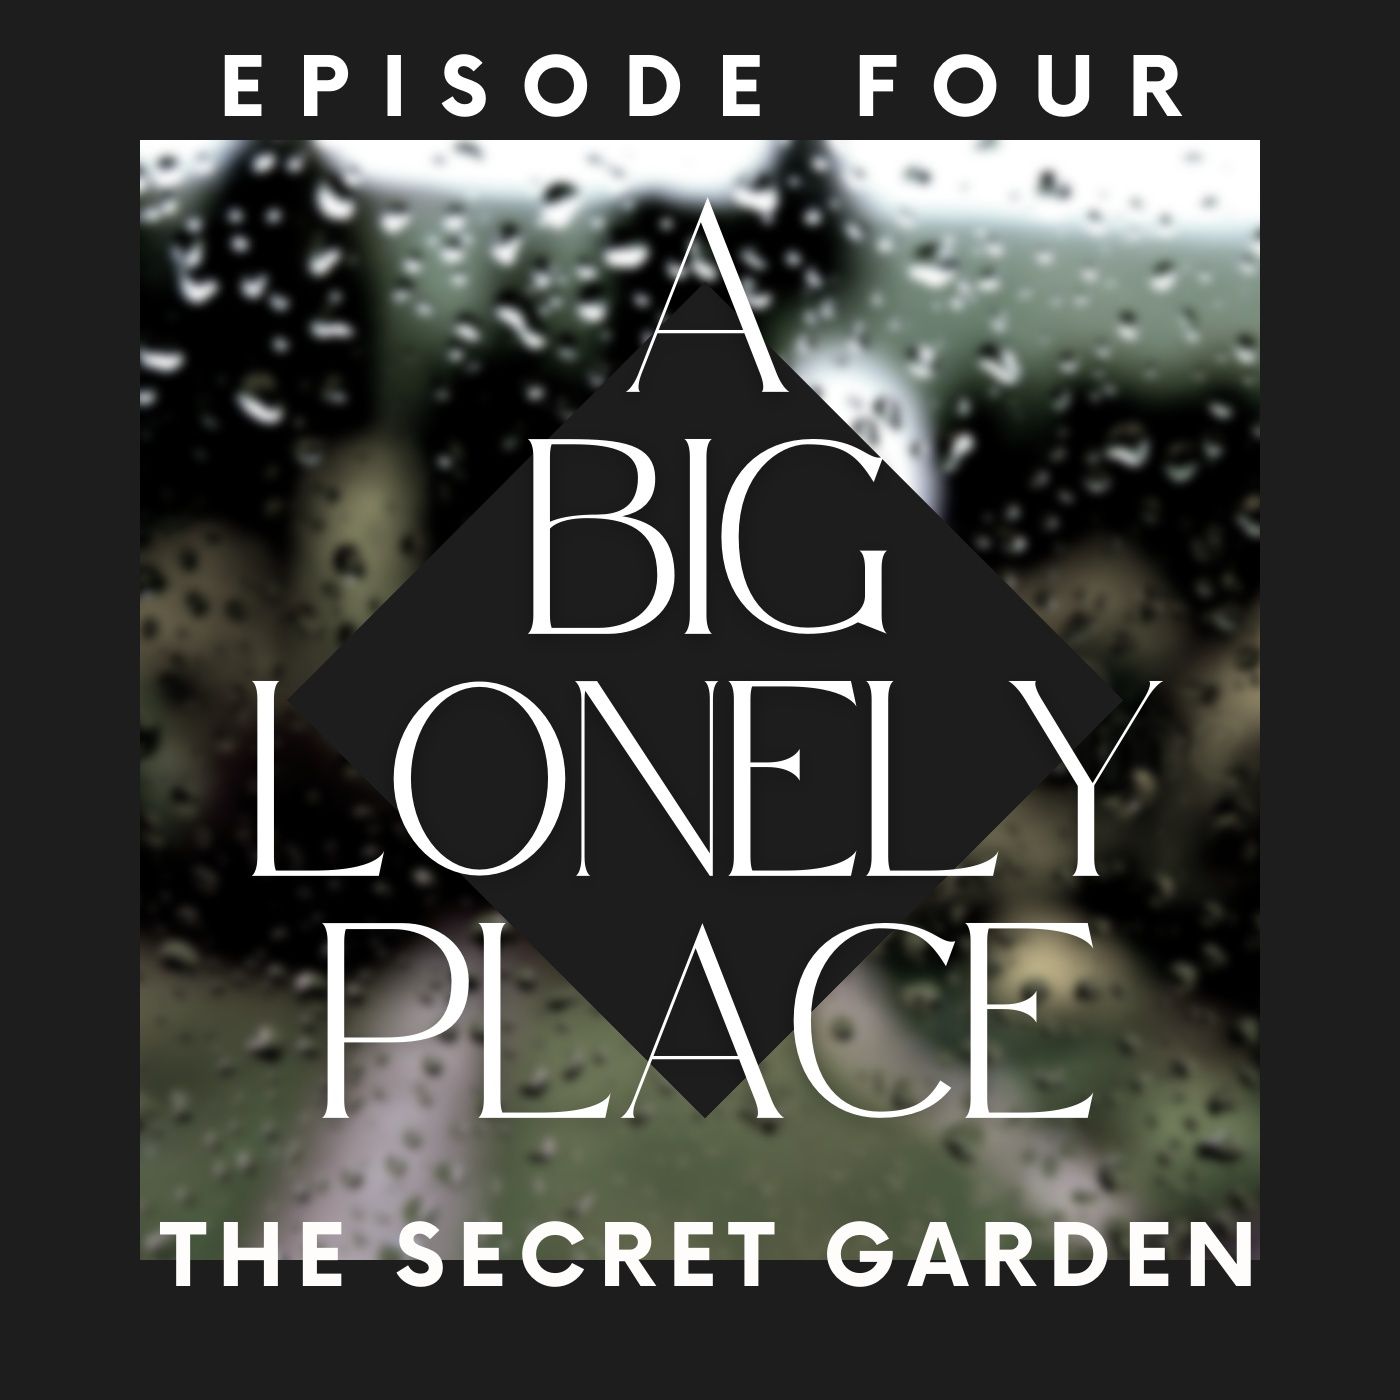 4. A Big Lonely Place